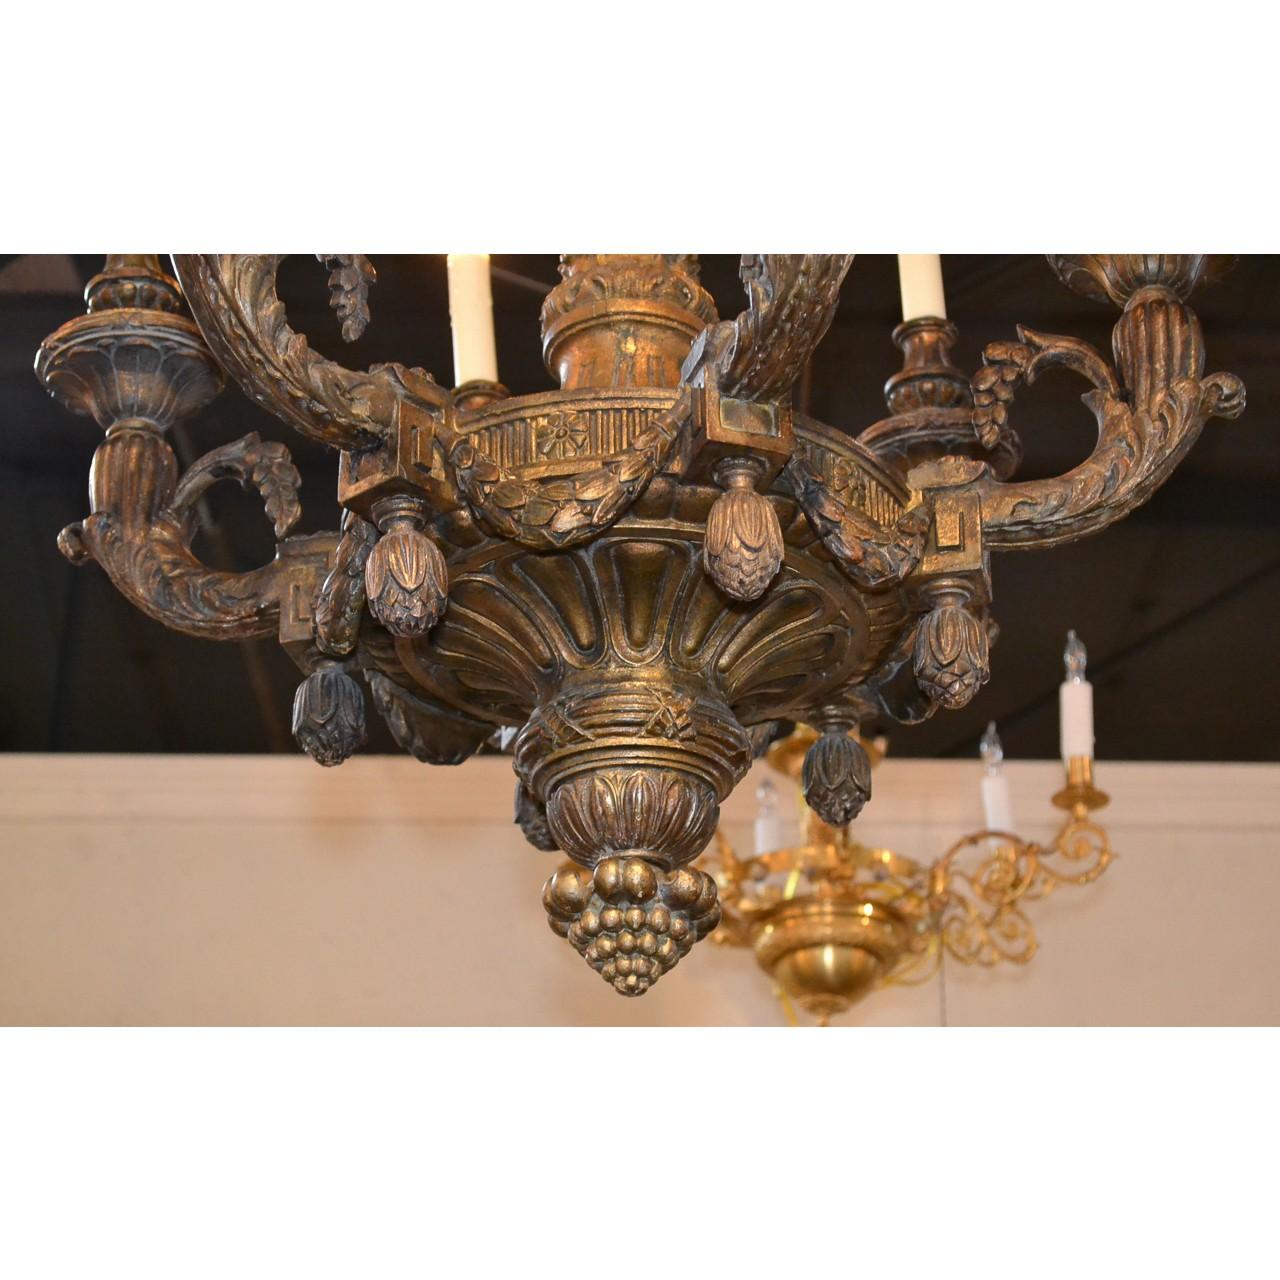 Understated 19th century French Louis XVI style duel-tone giltwood chandelier. The carved torch-shaped stem with twist-flutes and leaf tips leads to a finely carved circular centre with six branches accented with acanthus, thistle and berry swags,